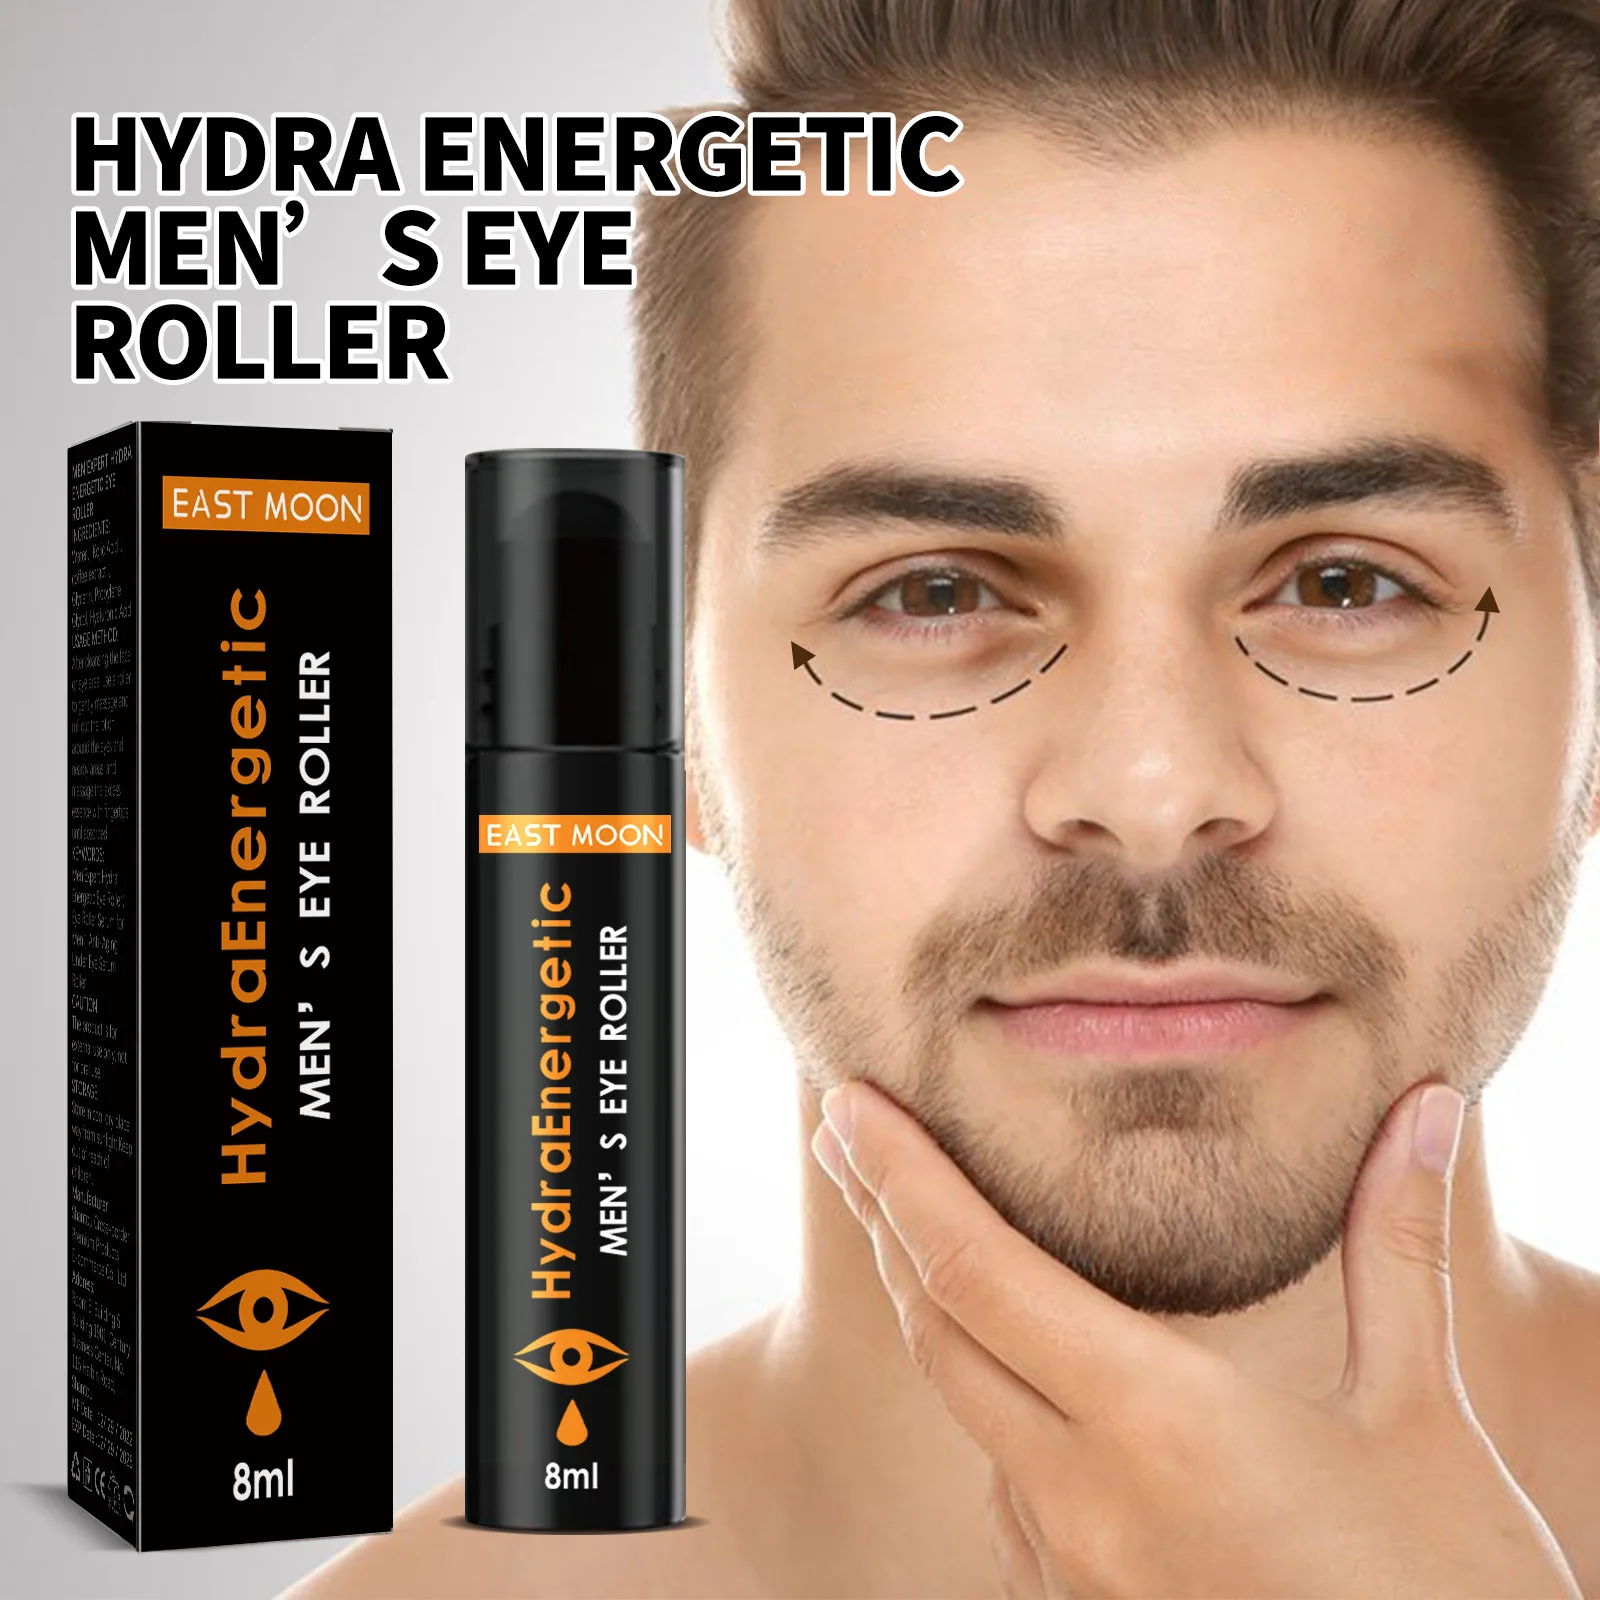 Men's eye rollers tighten lighten fine lines puffiness black circles and moisturize eye bags 1pcs cyr 3 s 3 1 4 s ycrs 48 52 inner diameter 25 4 mm height 44 45 mm yoke type track rollers inch system cam follower black